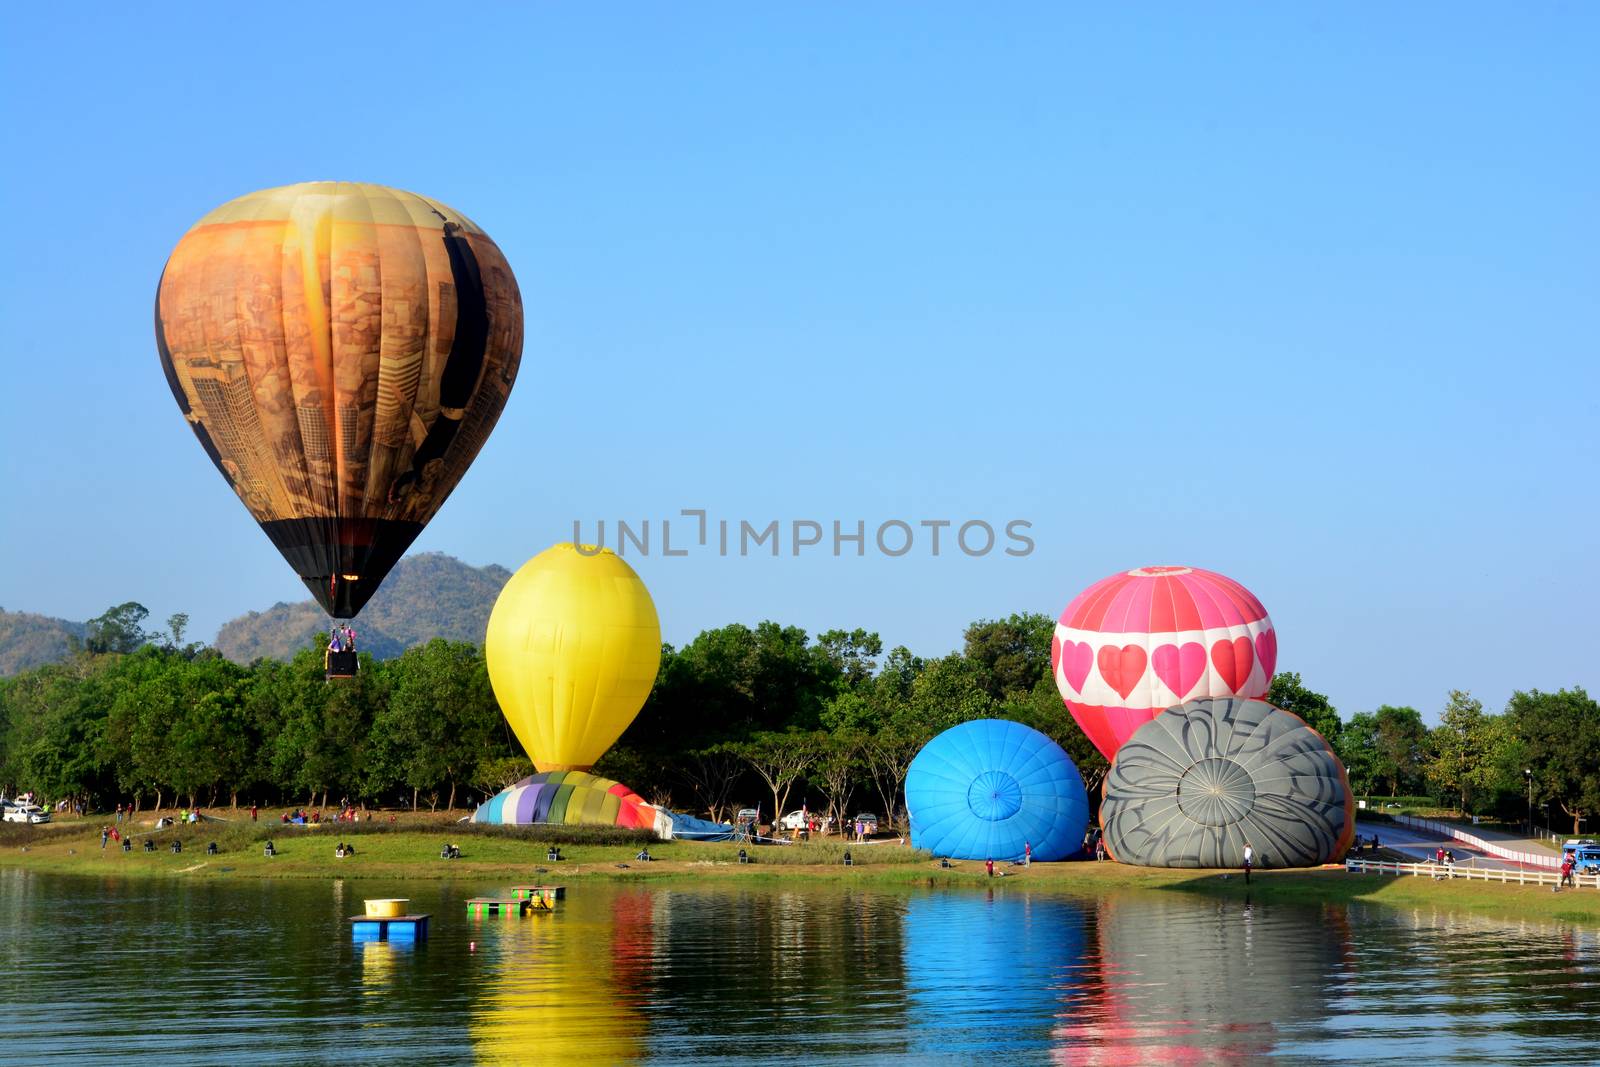 Balloon Festival by ideation90